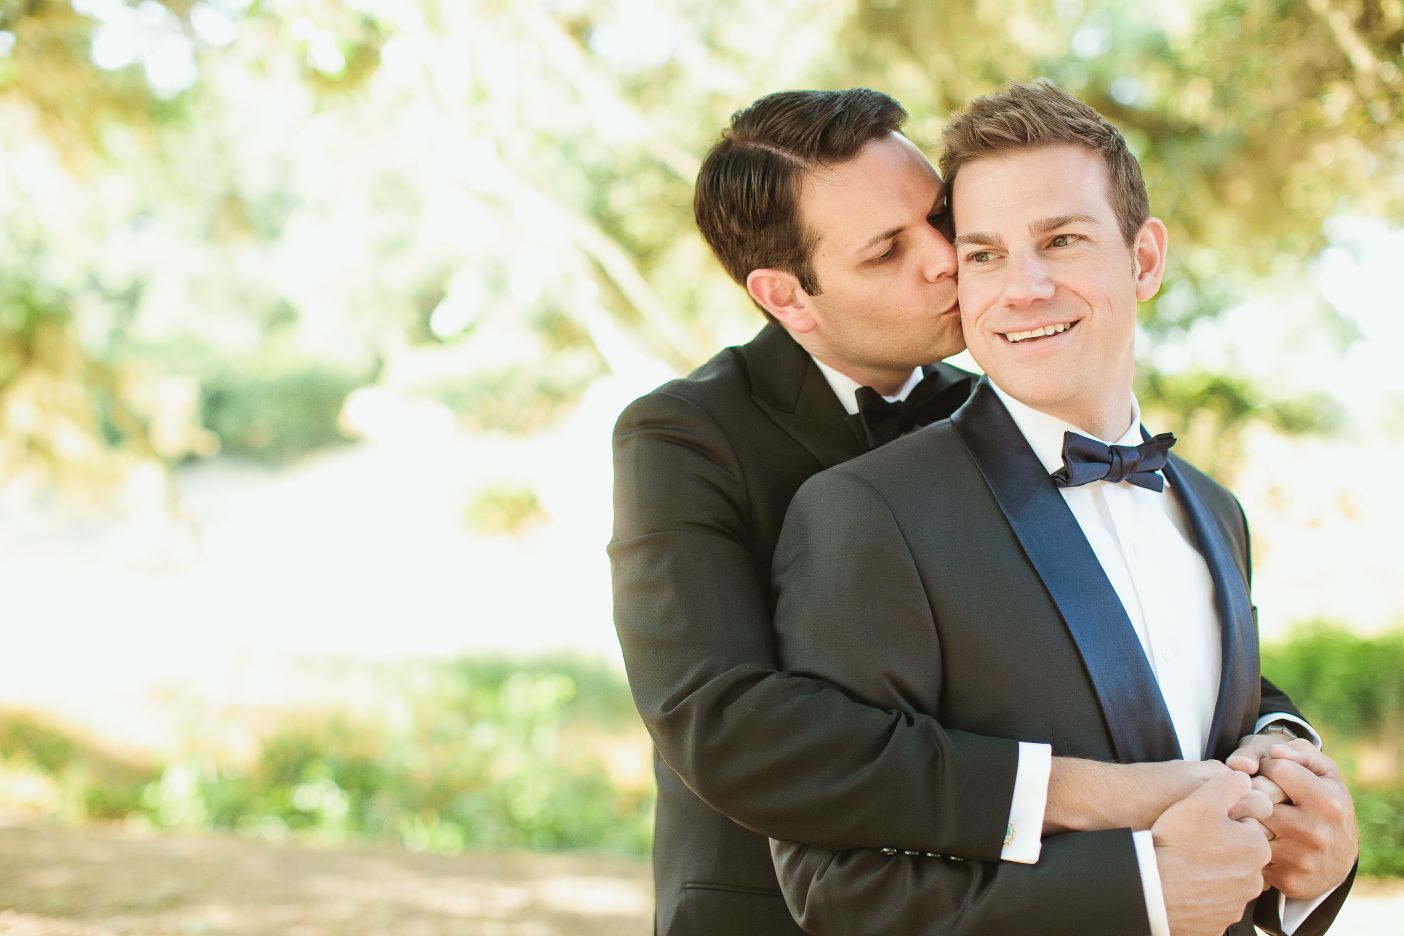 dance,gay,wedding,gay life,videos,gay couple,happiness,love,featured,storie...